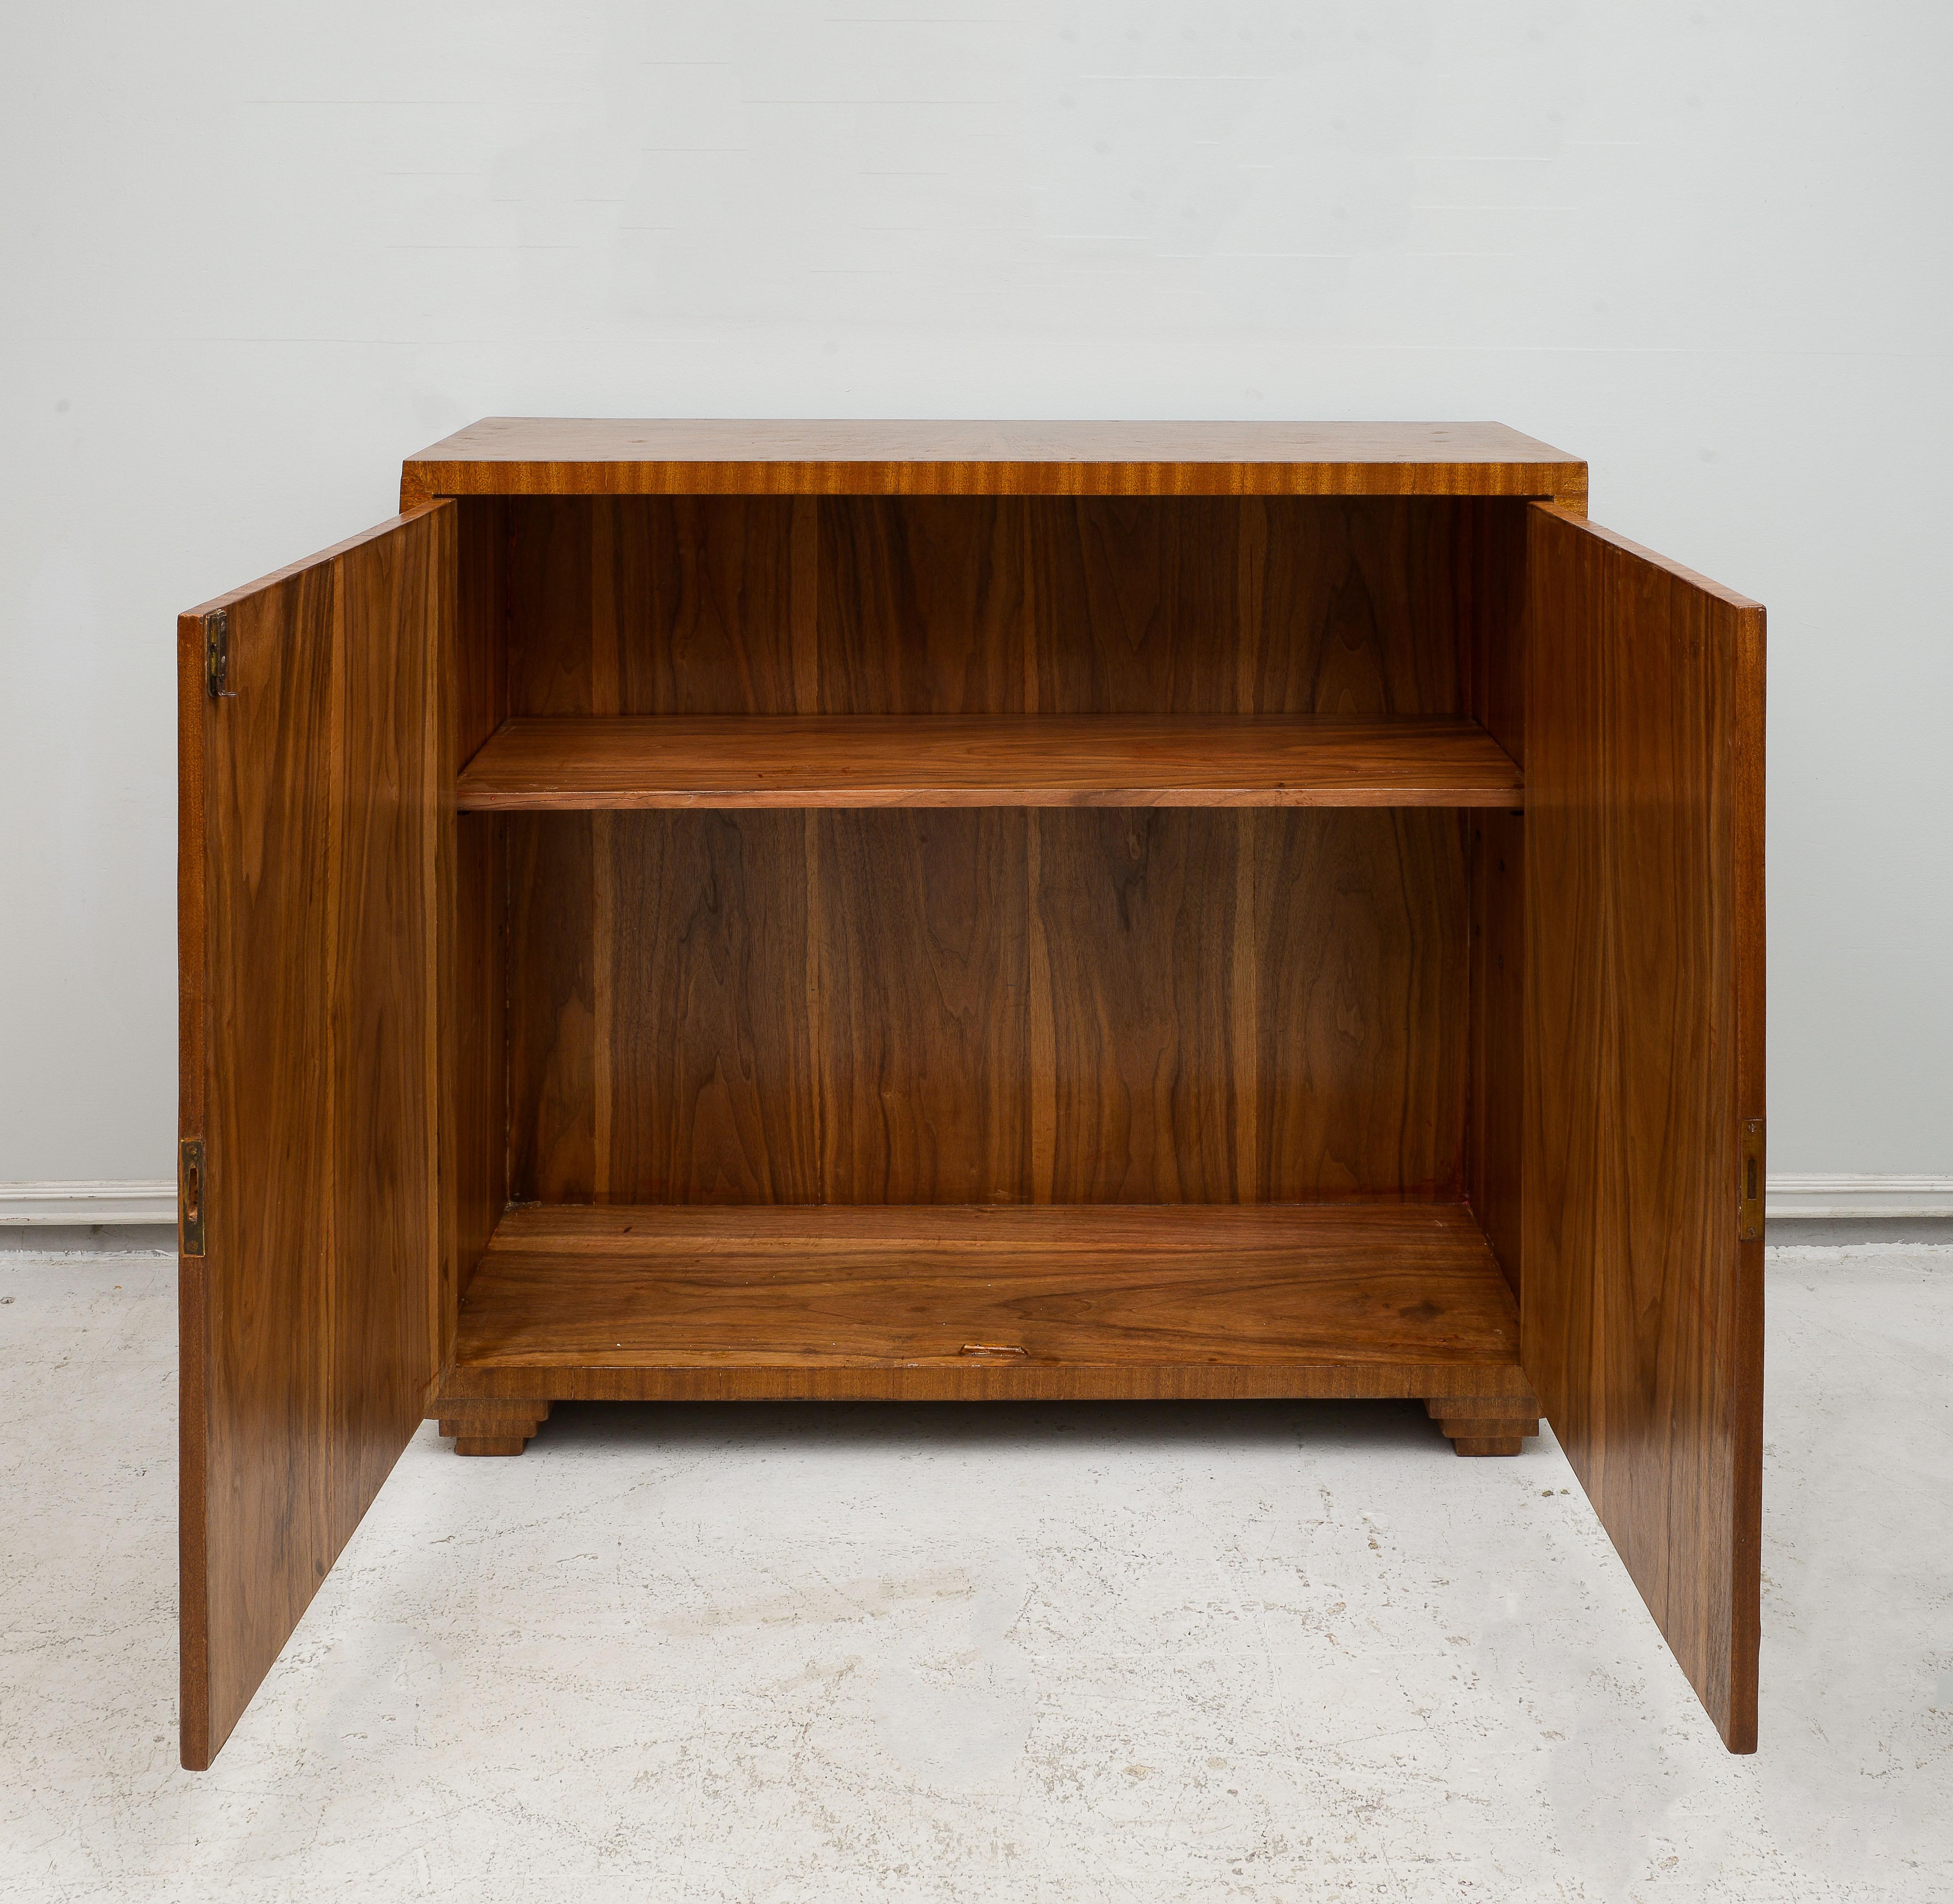 Jean-Michel Frank Inspired Exquisitely Crafted Parquetry Cabinet In Good Condition For Sale In New York, NY